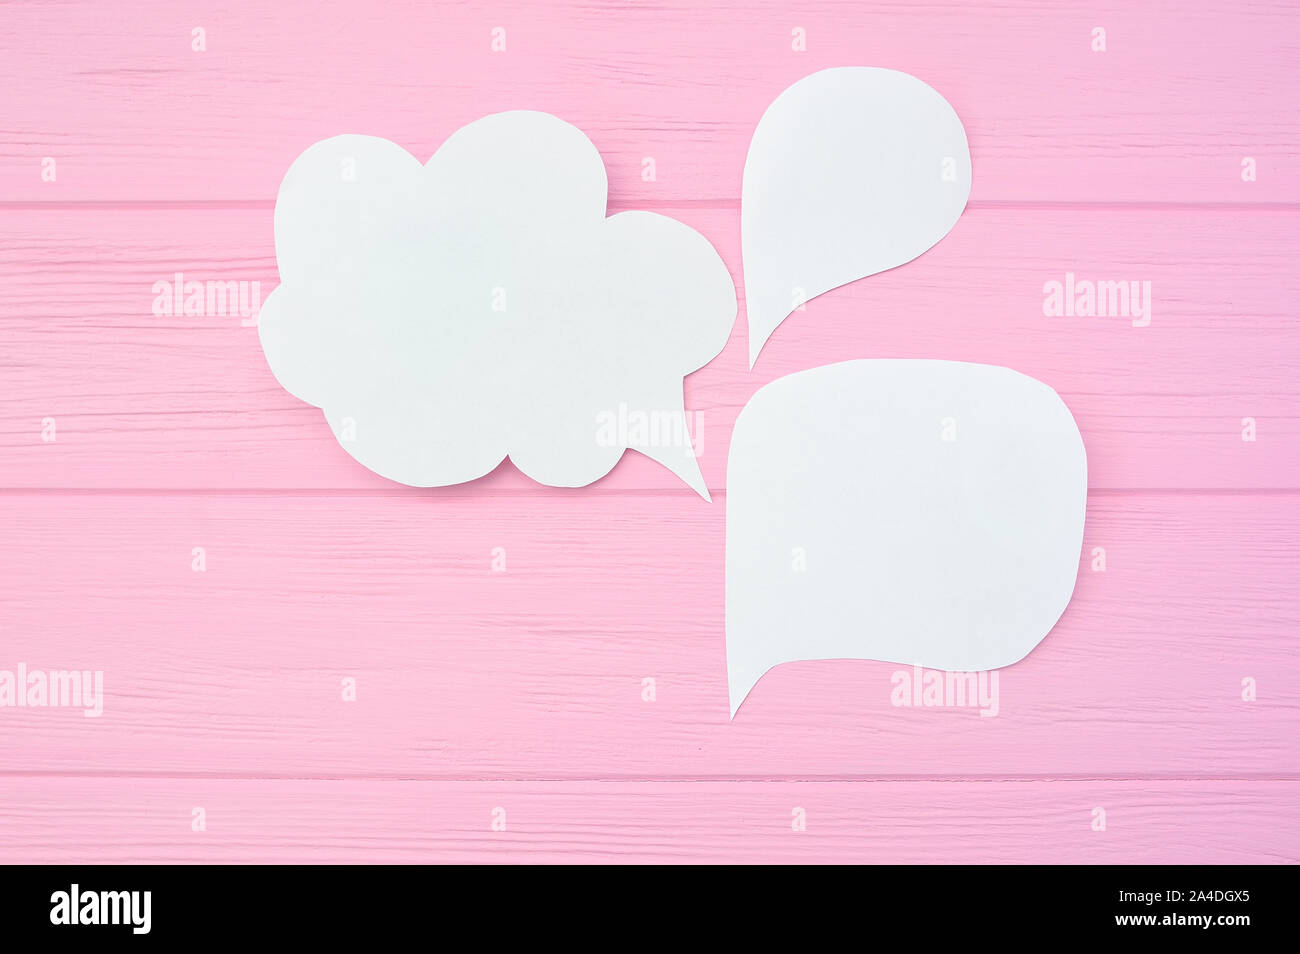 Collection paper speech bubble. Dialog questions and answer on a pink wooden background Stock Photo